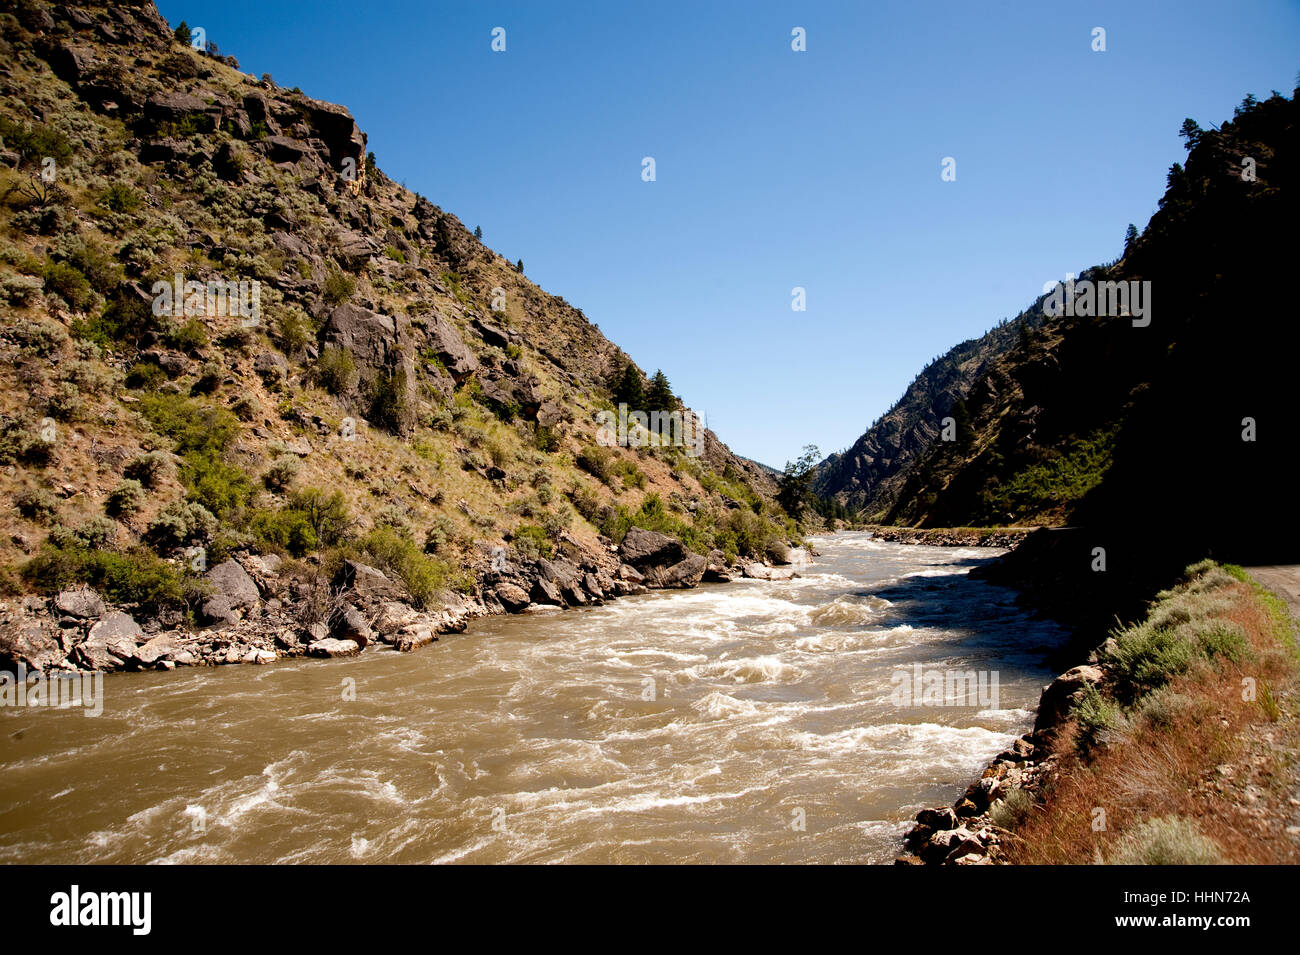 Salmon River rapids along Salmon River Road, Brown water created by the rapids in valley surrounded by part of the Sawtooth Mtn. Stock Photo